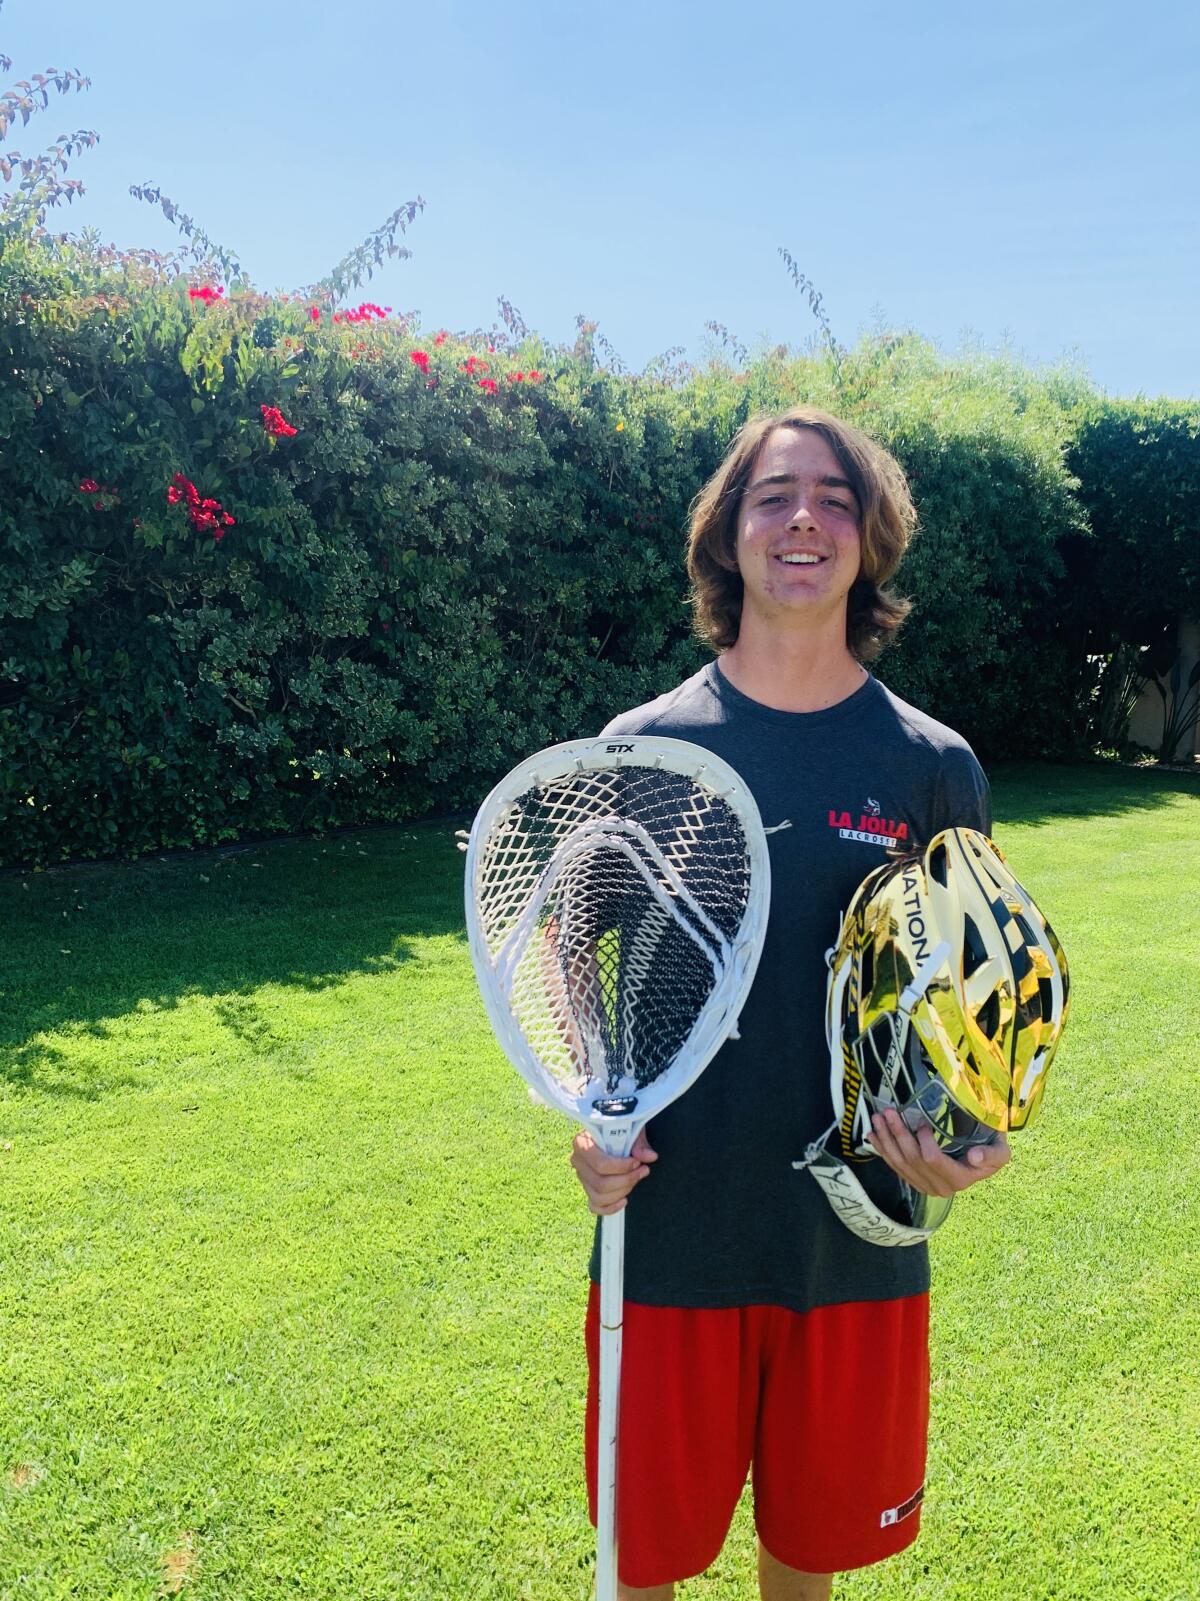 La Jolla High School student and lacrosse player Billy Stephens.